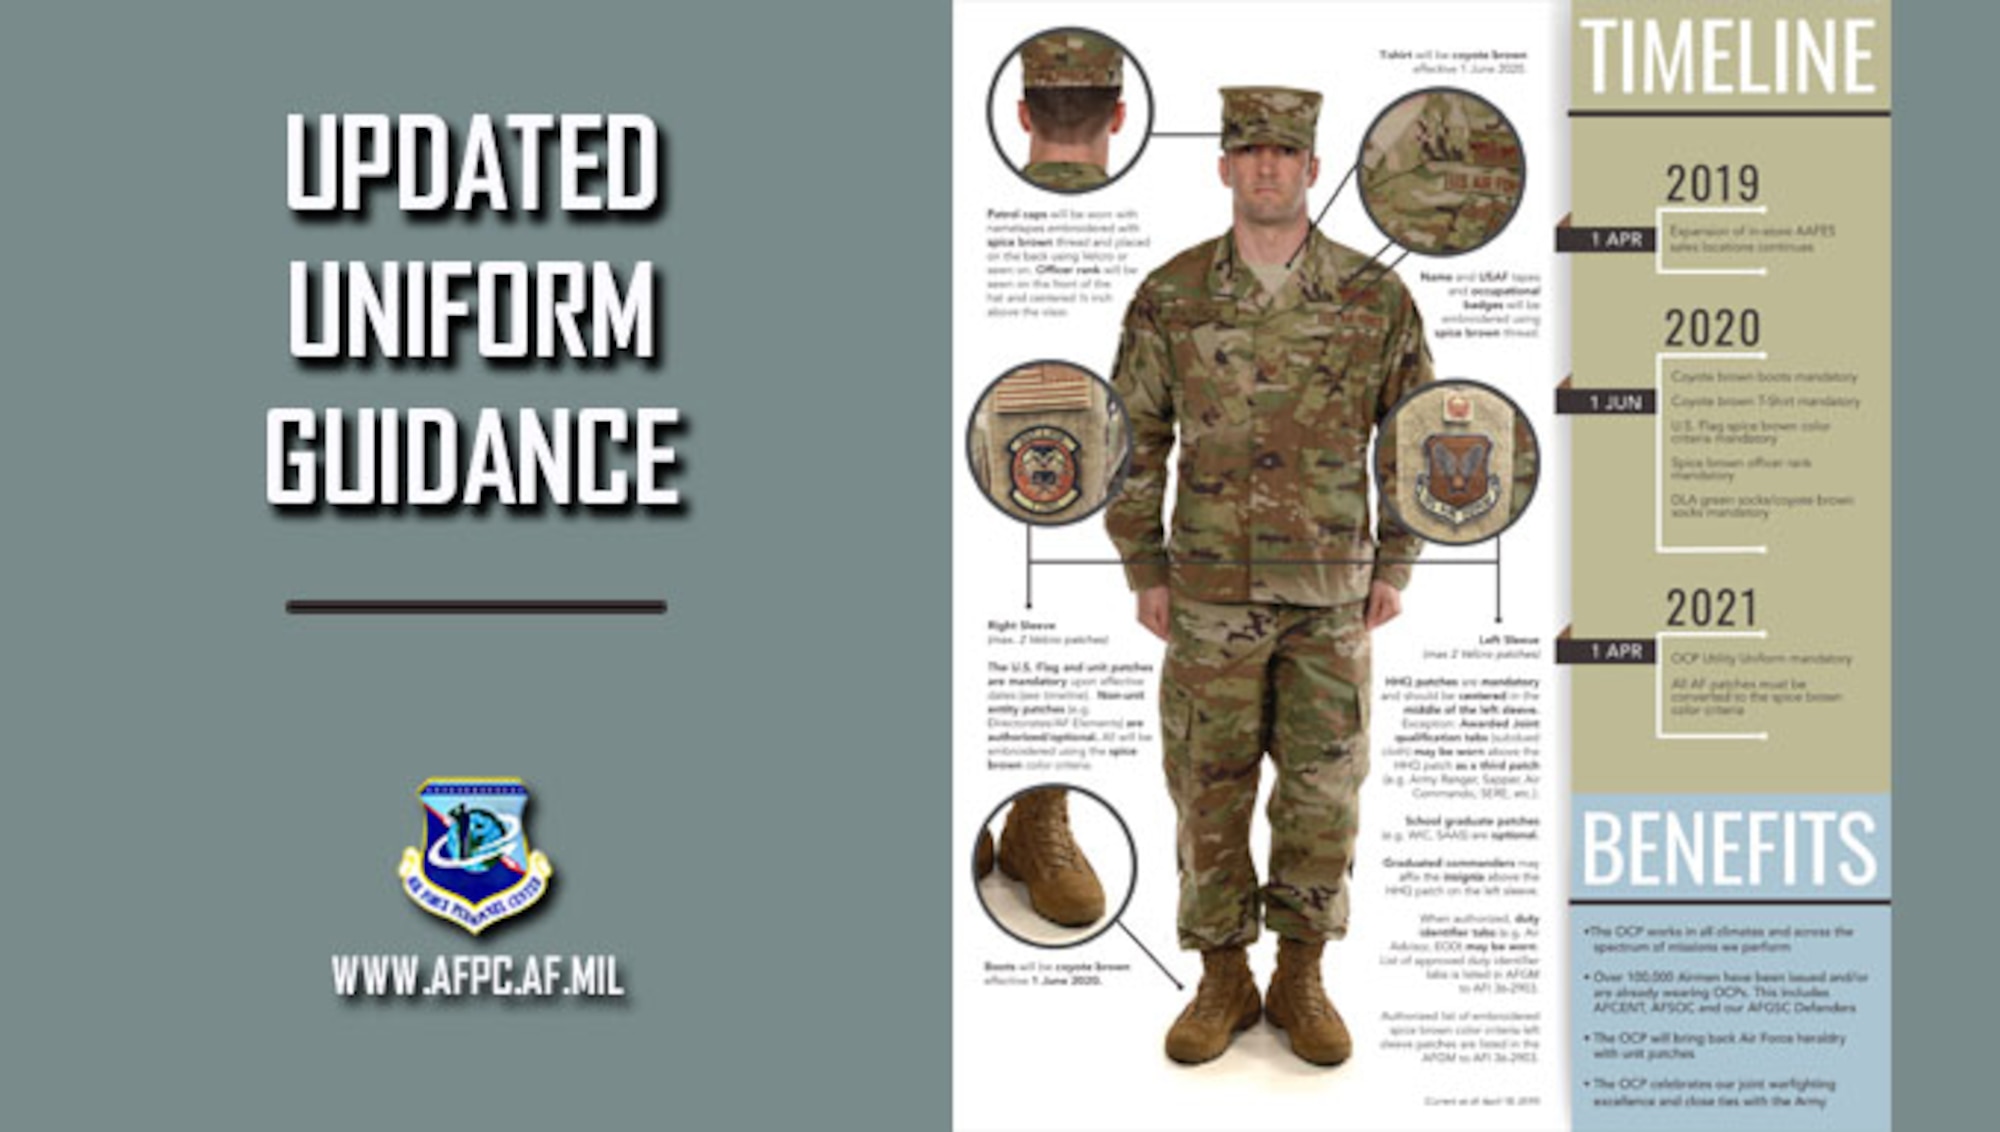 A guide on the OCP uniform phase-in and what will be allowed in regulation before OCPs become the mandatory Air Force uniform. Airmen can start to wear the OCP uniform on Oct. 1, 2018. (U.S. Air Force graphic courtesy of the Air Force Personnel Center)